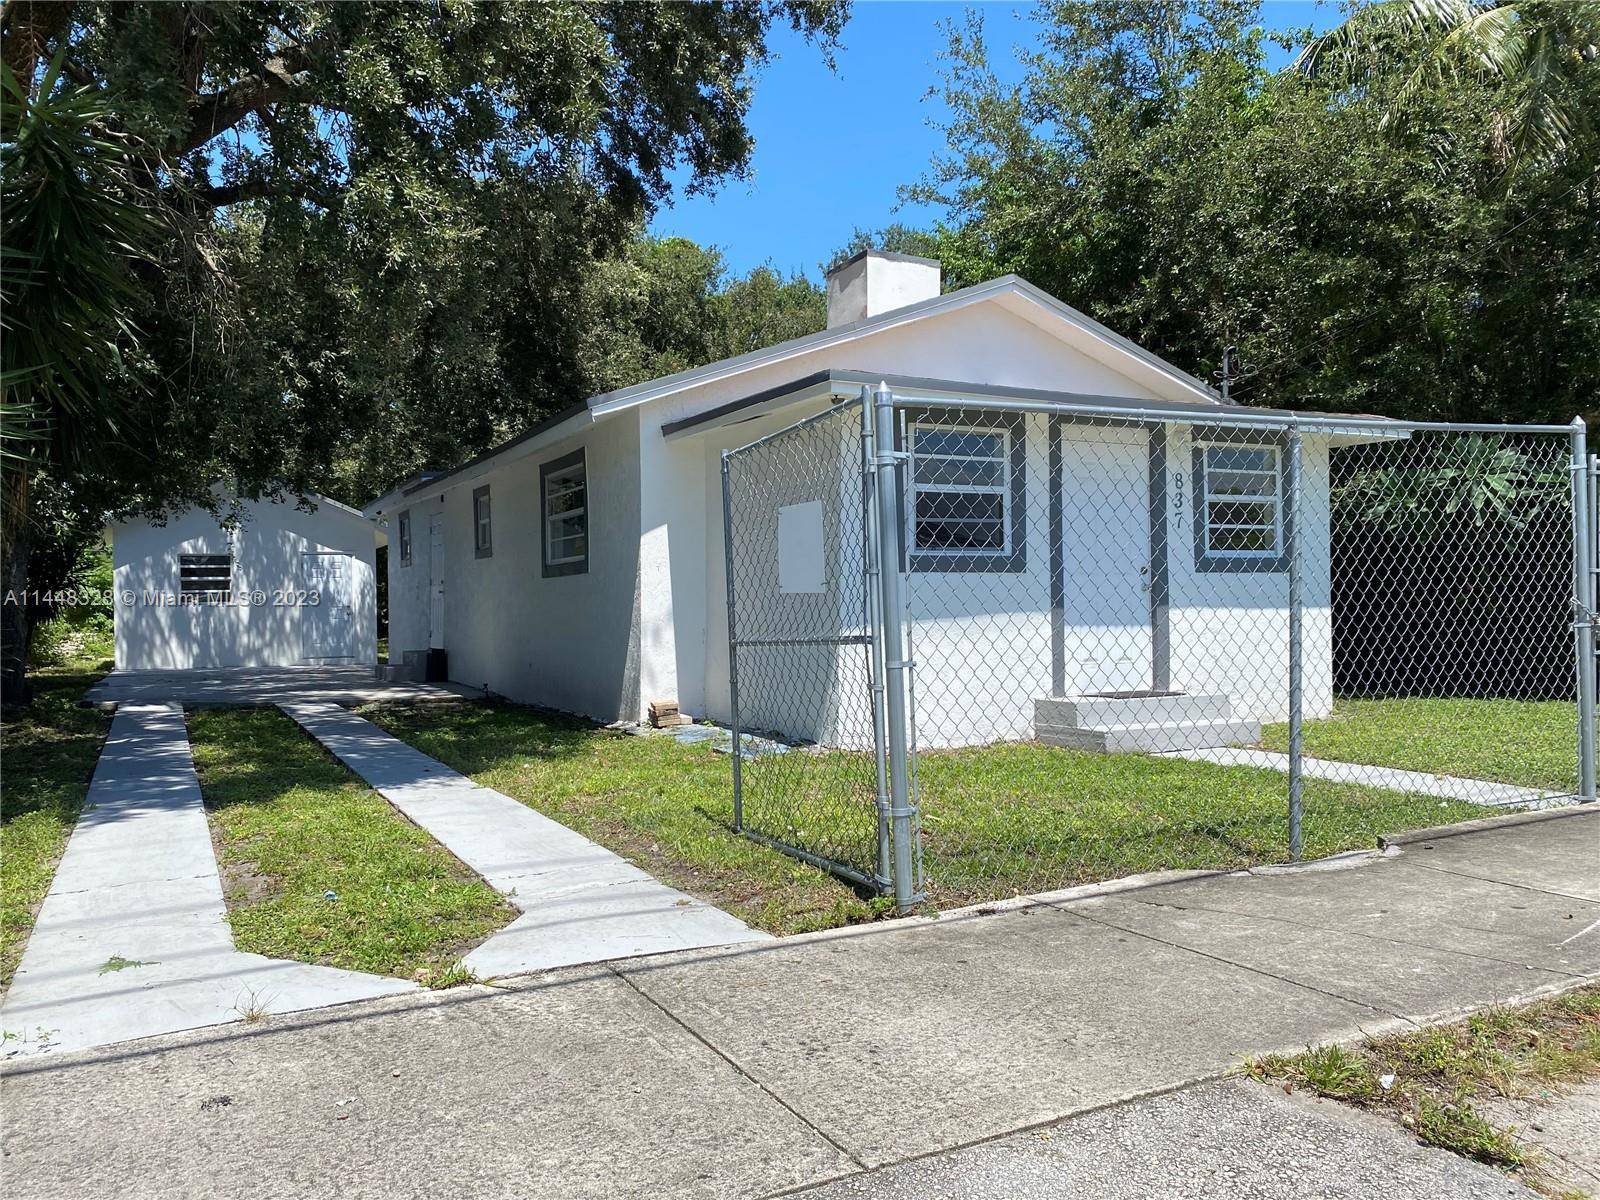 Great opportunity in Little River, close to major east west thoroughfares leading to major population centers, Miami Design District, Midtown and Wynwood.